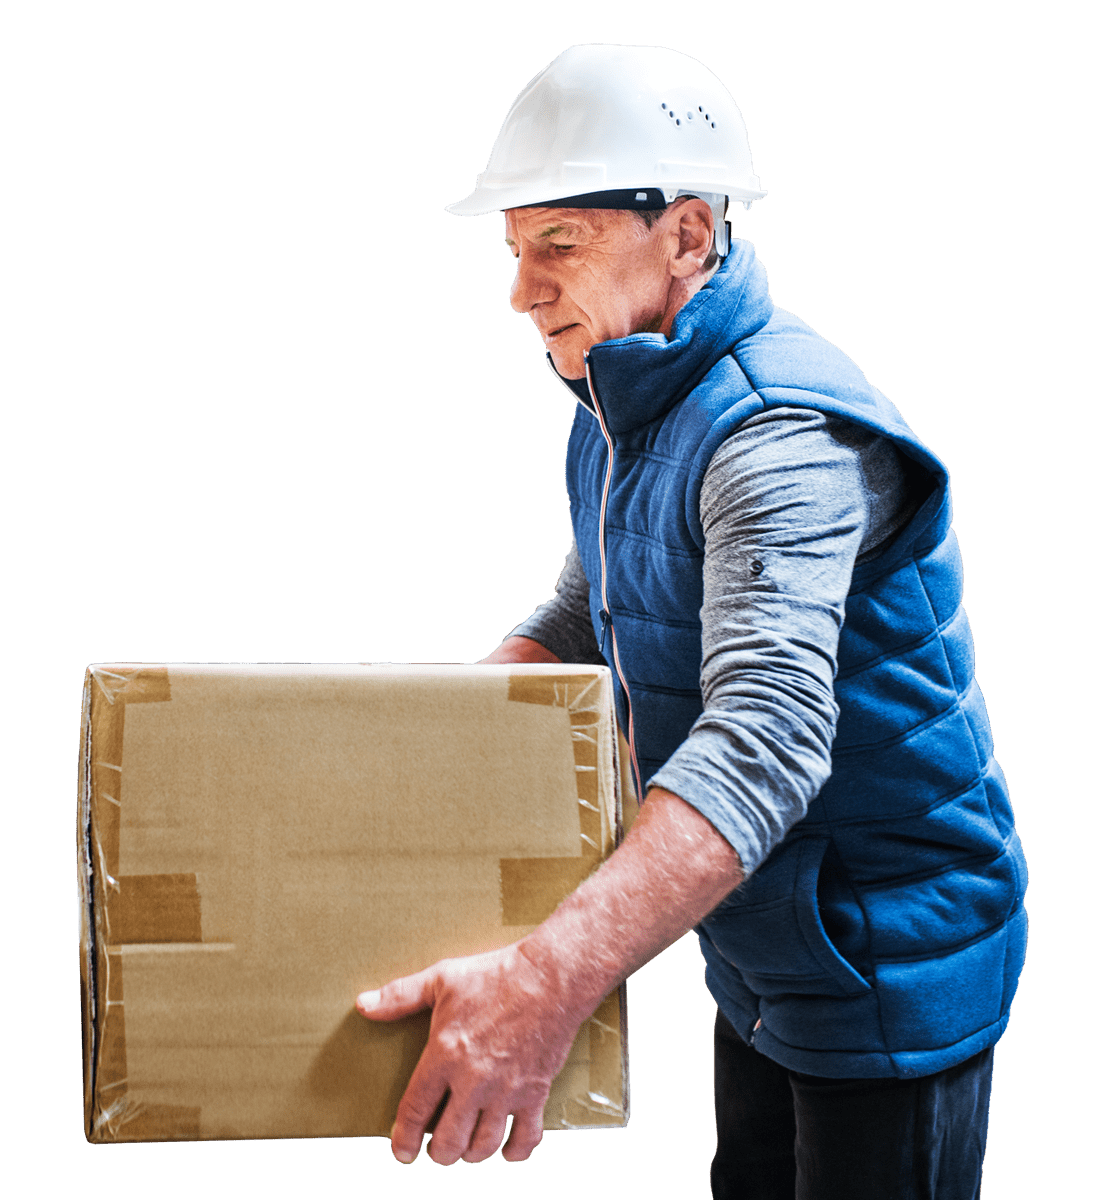 A man with a hard hat carrying a cardboard package.